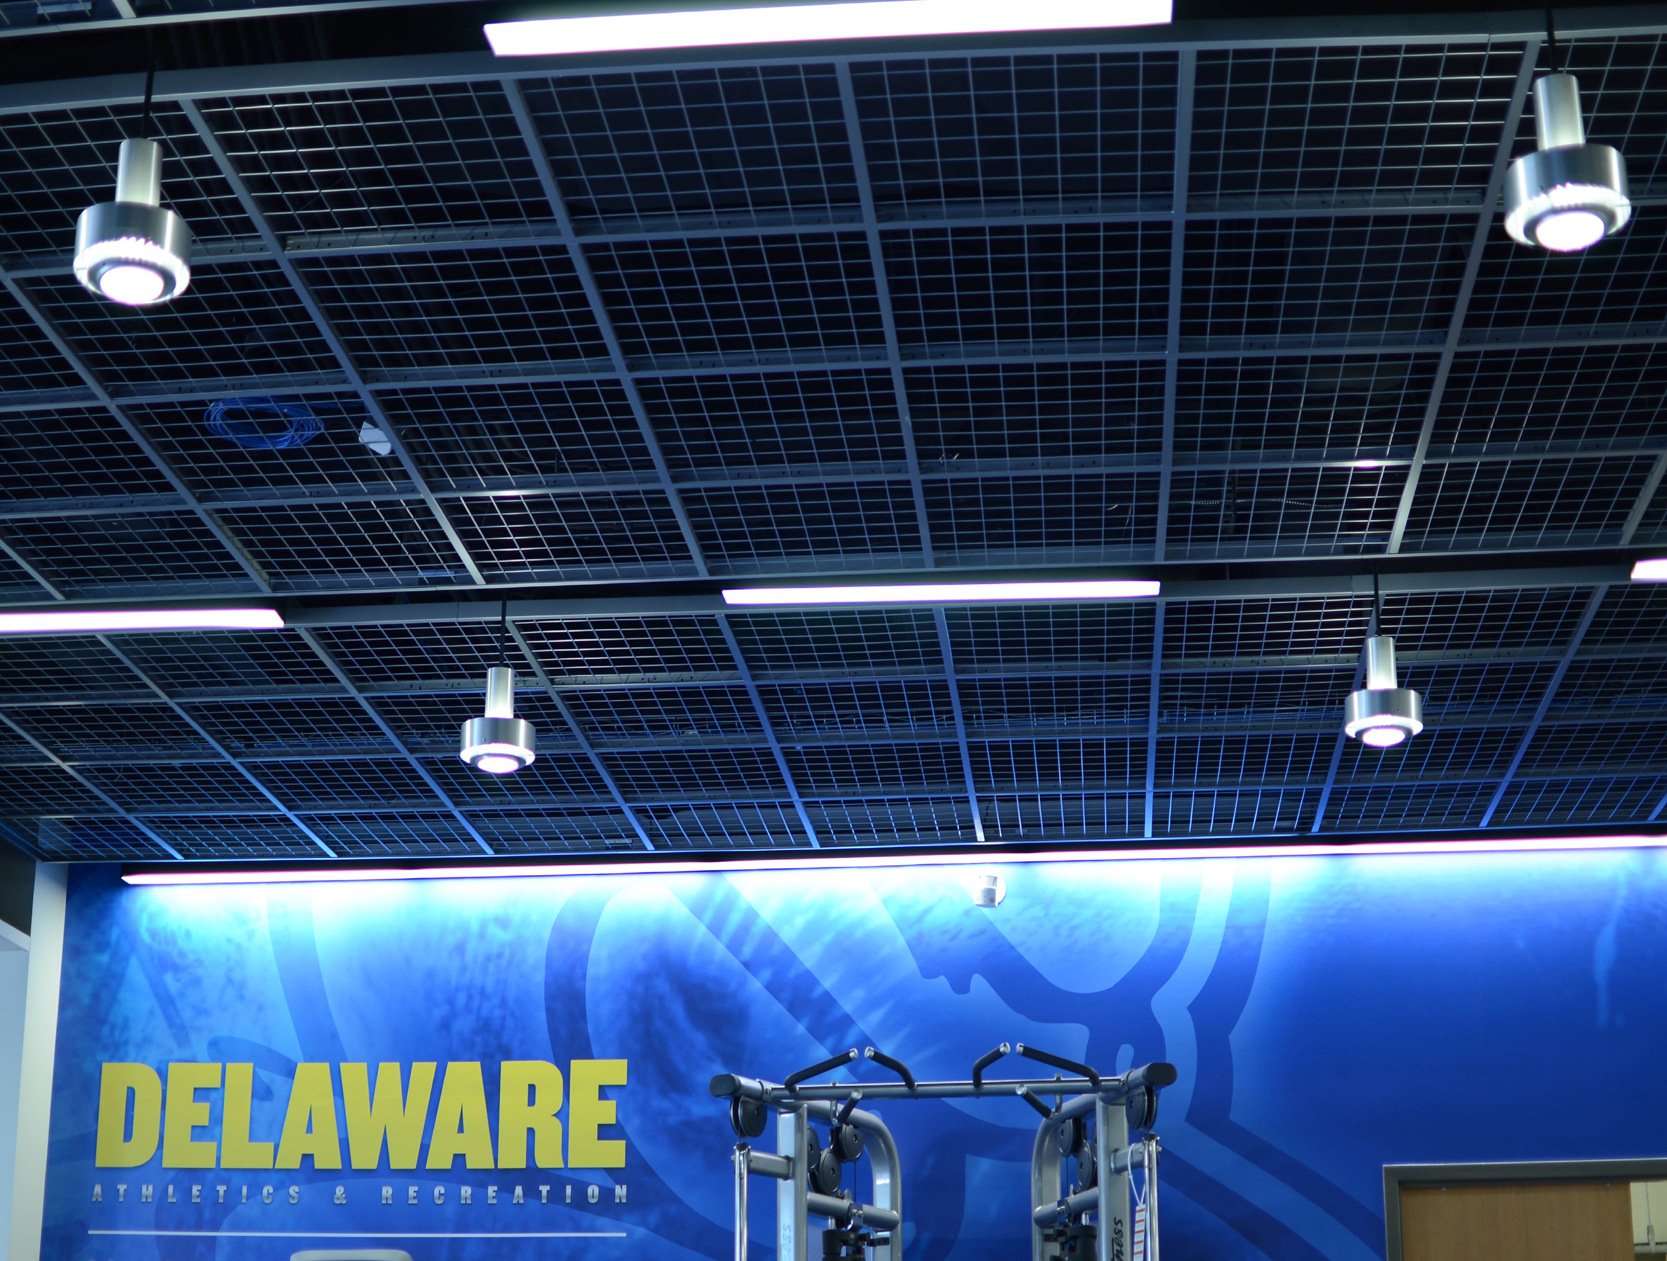 WireFrame Welded Wire Ceiling Panels